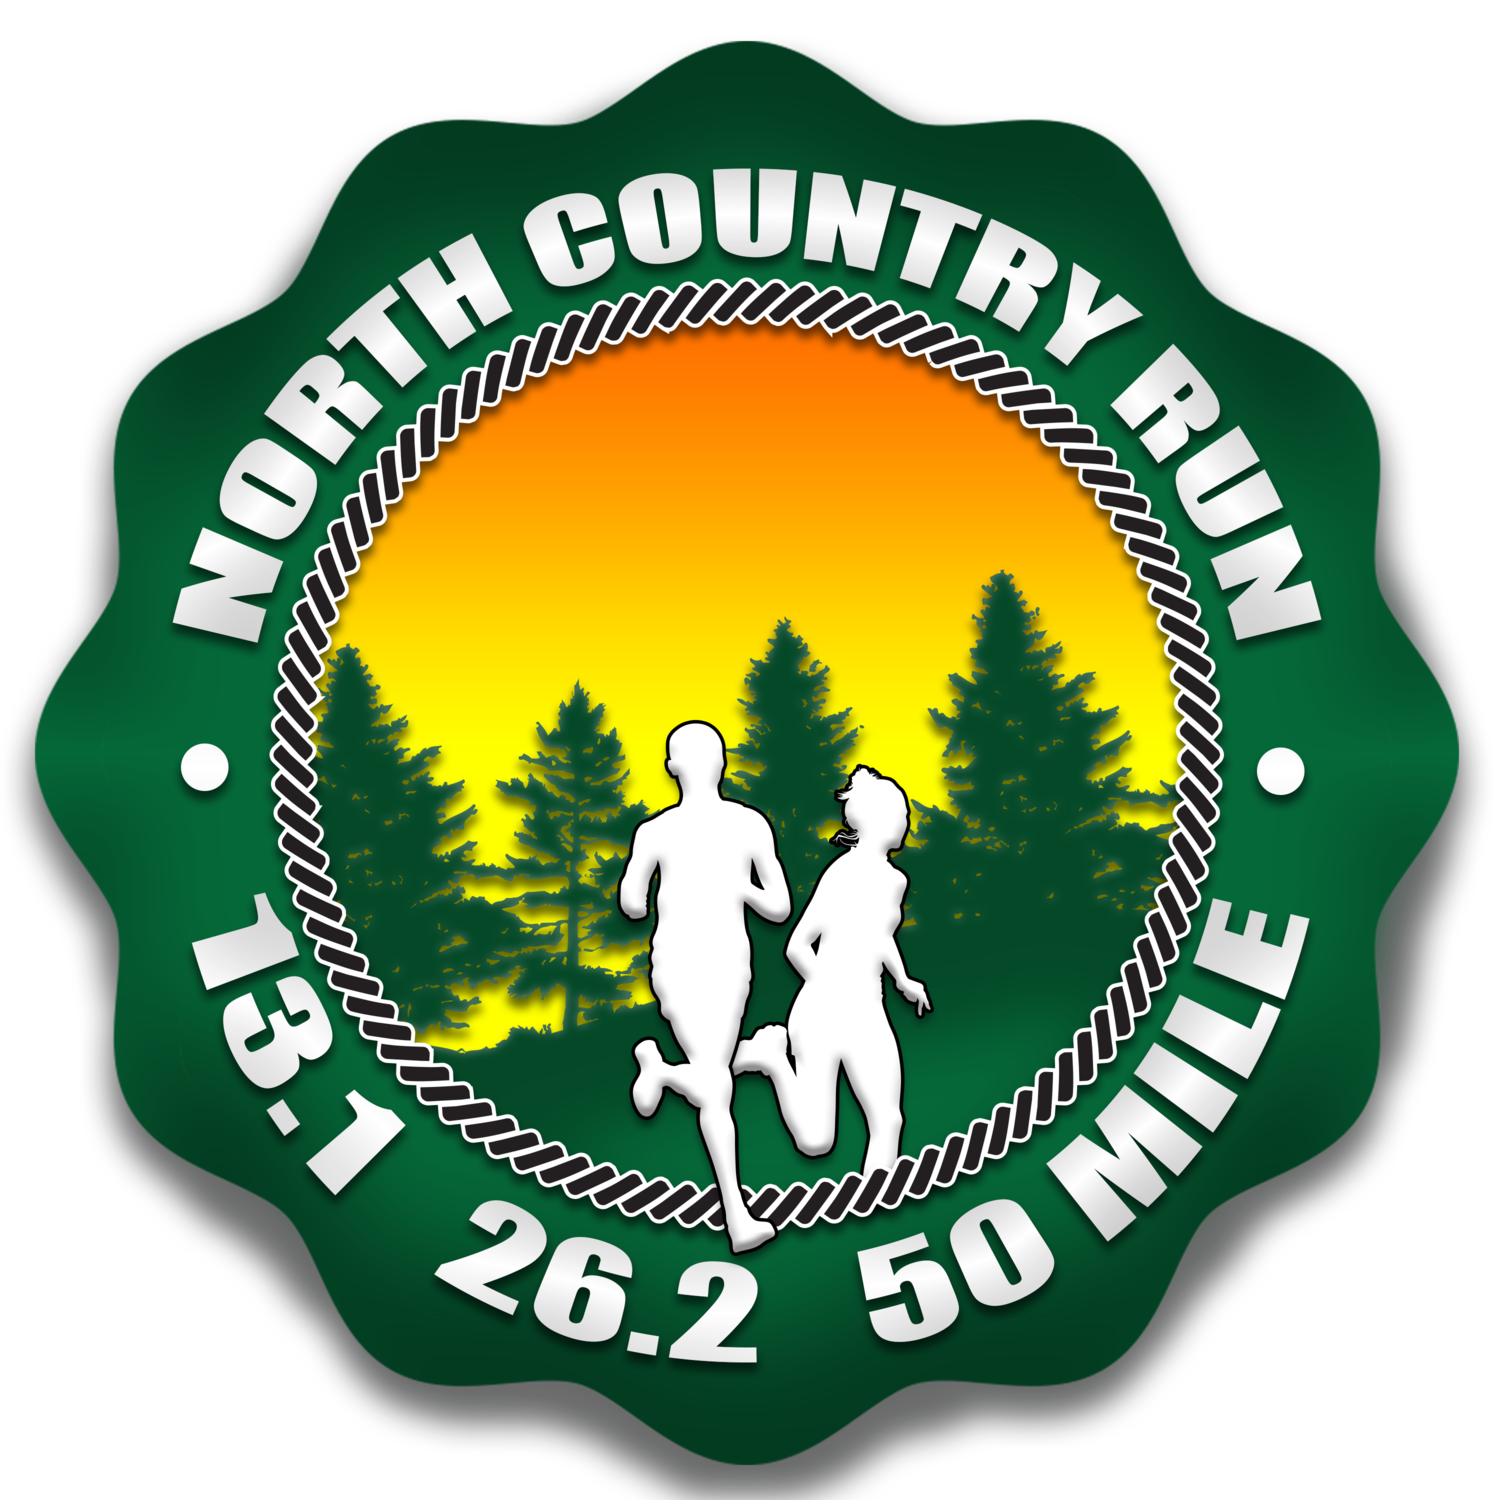 2019 to 2020 North Country Trail Run Transfer Form